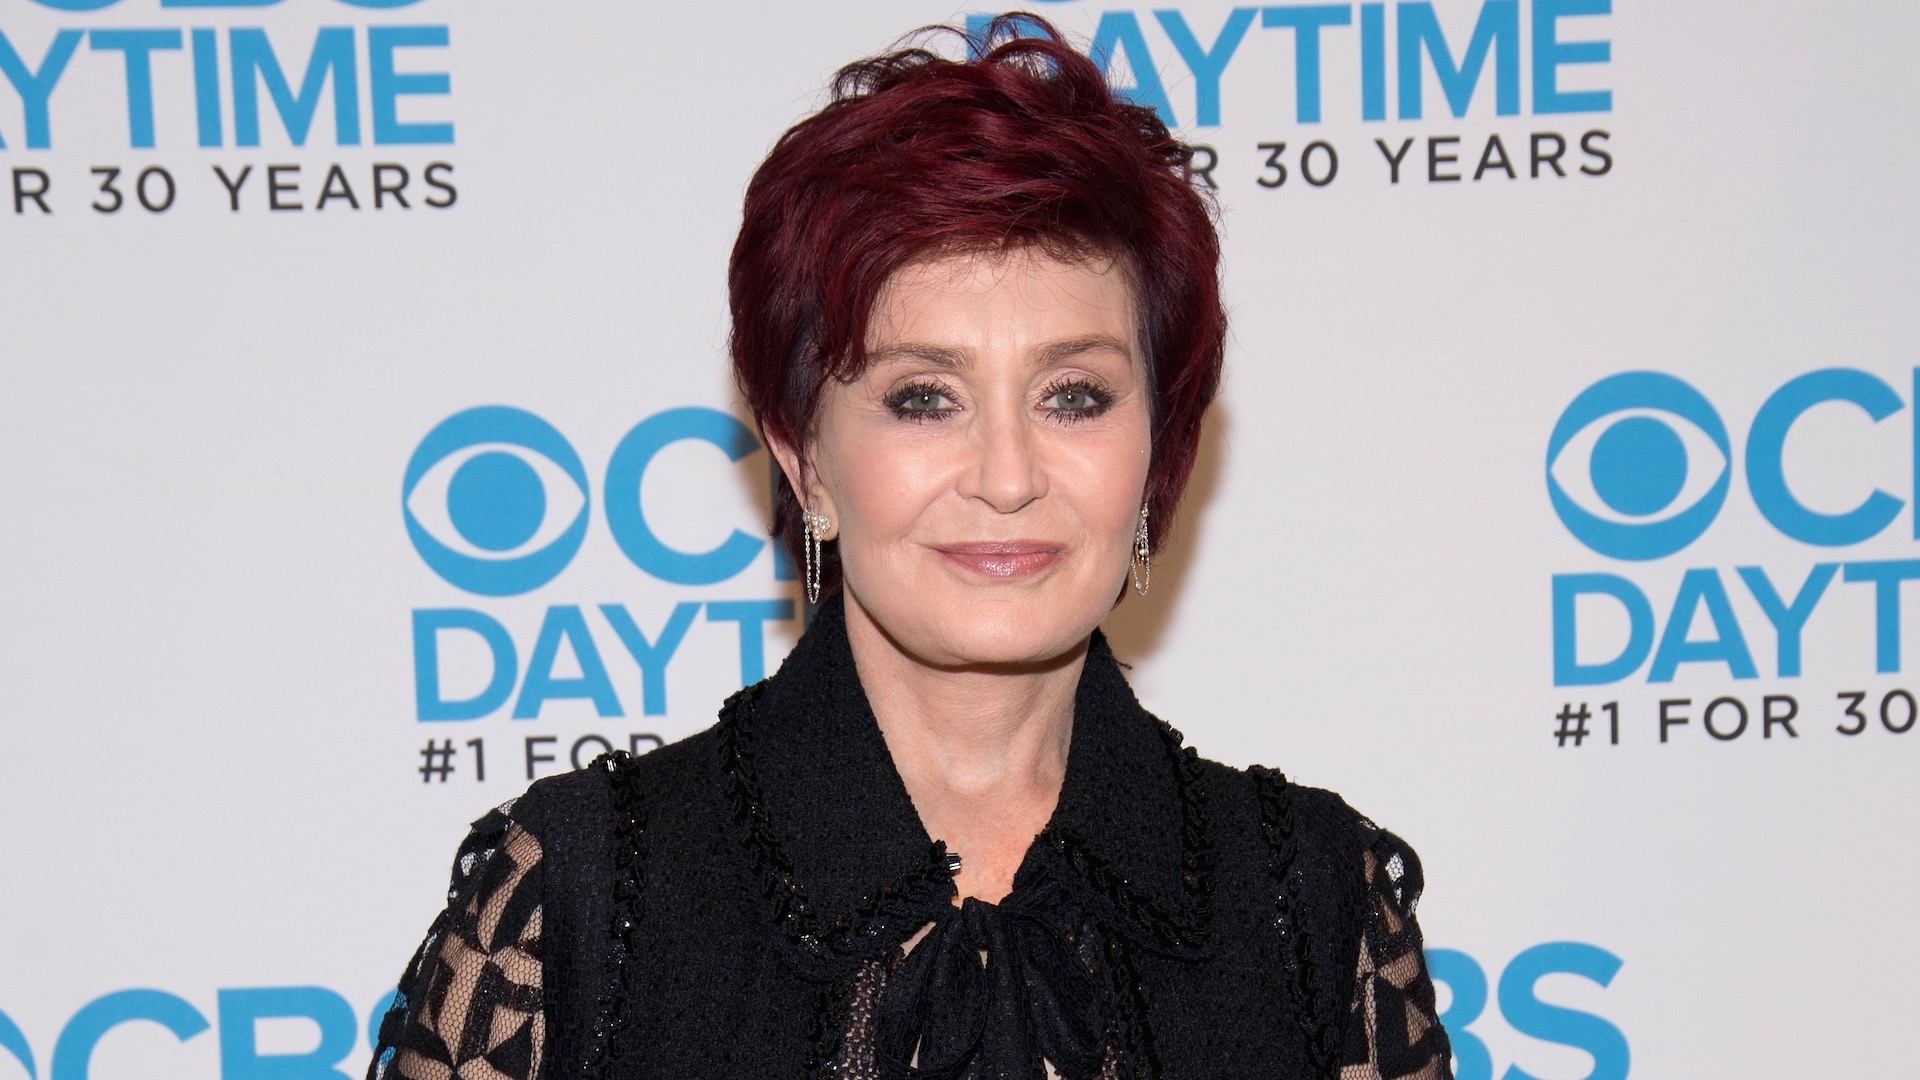 Sharon Osbourne Exits ‘The Talk’ Following Racism and Misconduct Allegations